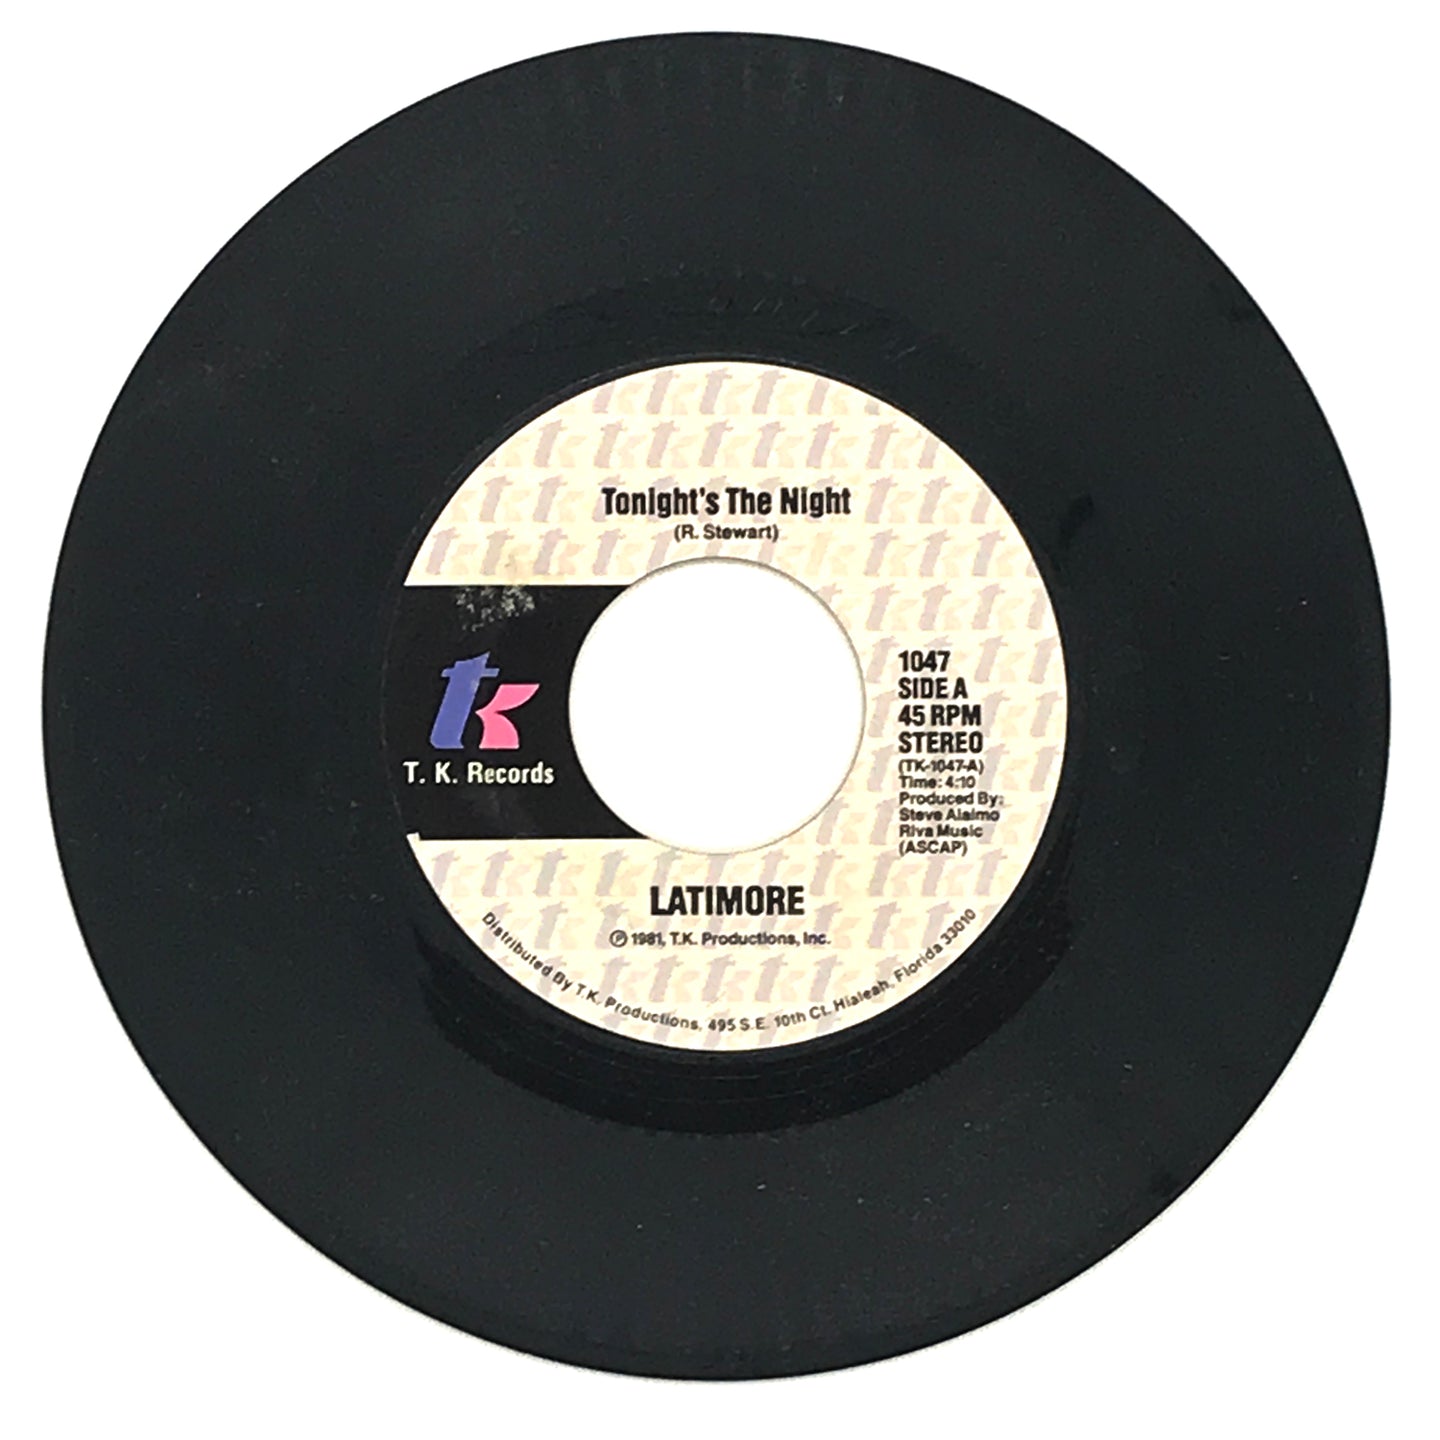 Latimore : TONIGHT'S THE NIGHT/ OUT TO GET'CHA